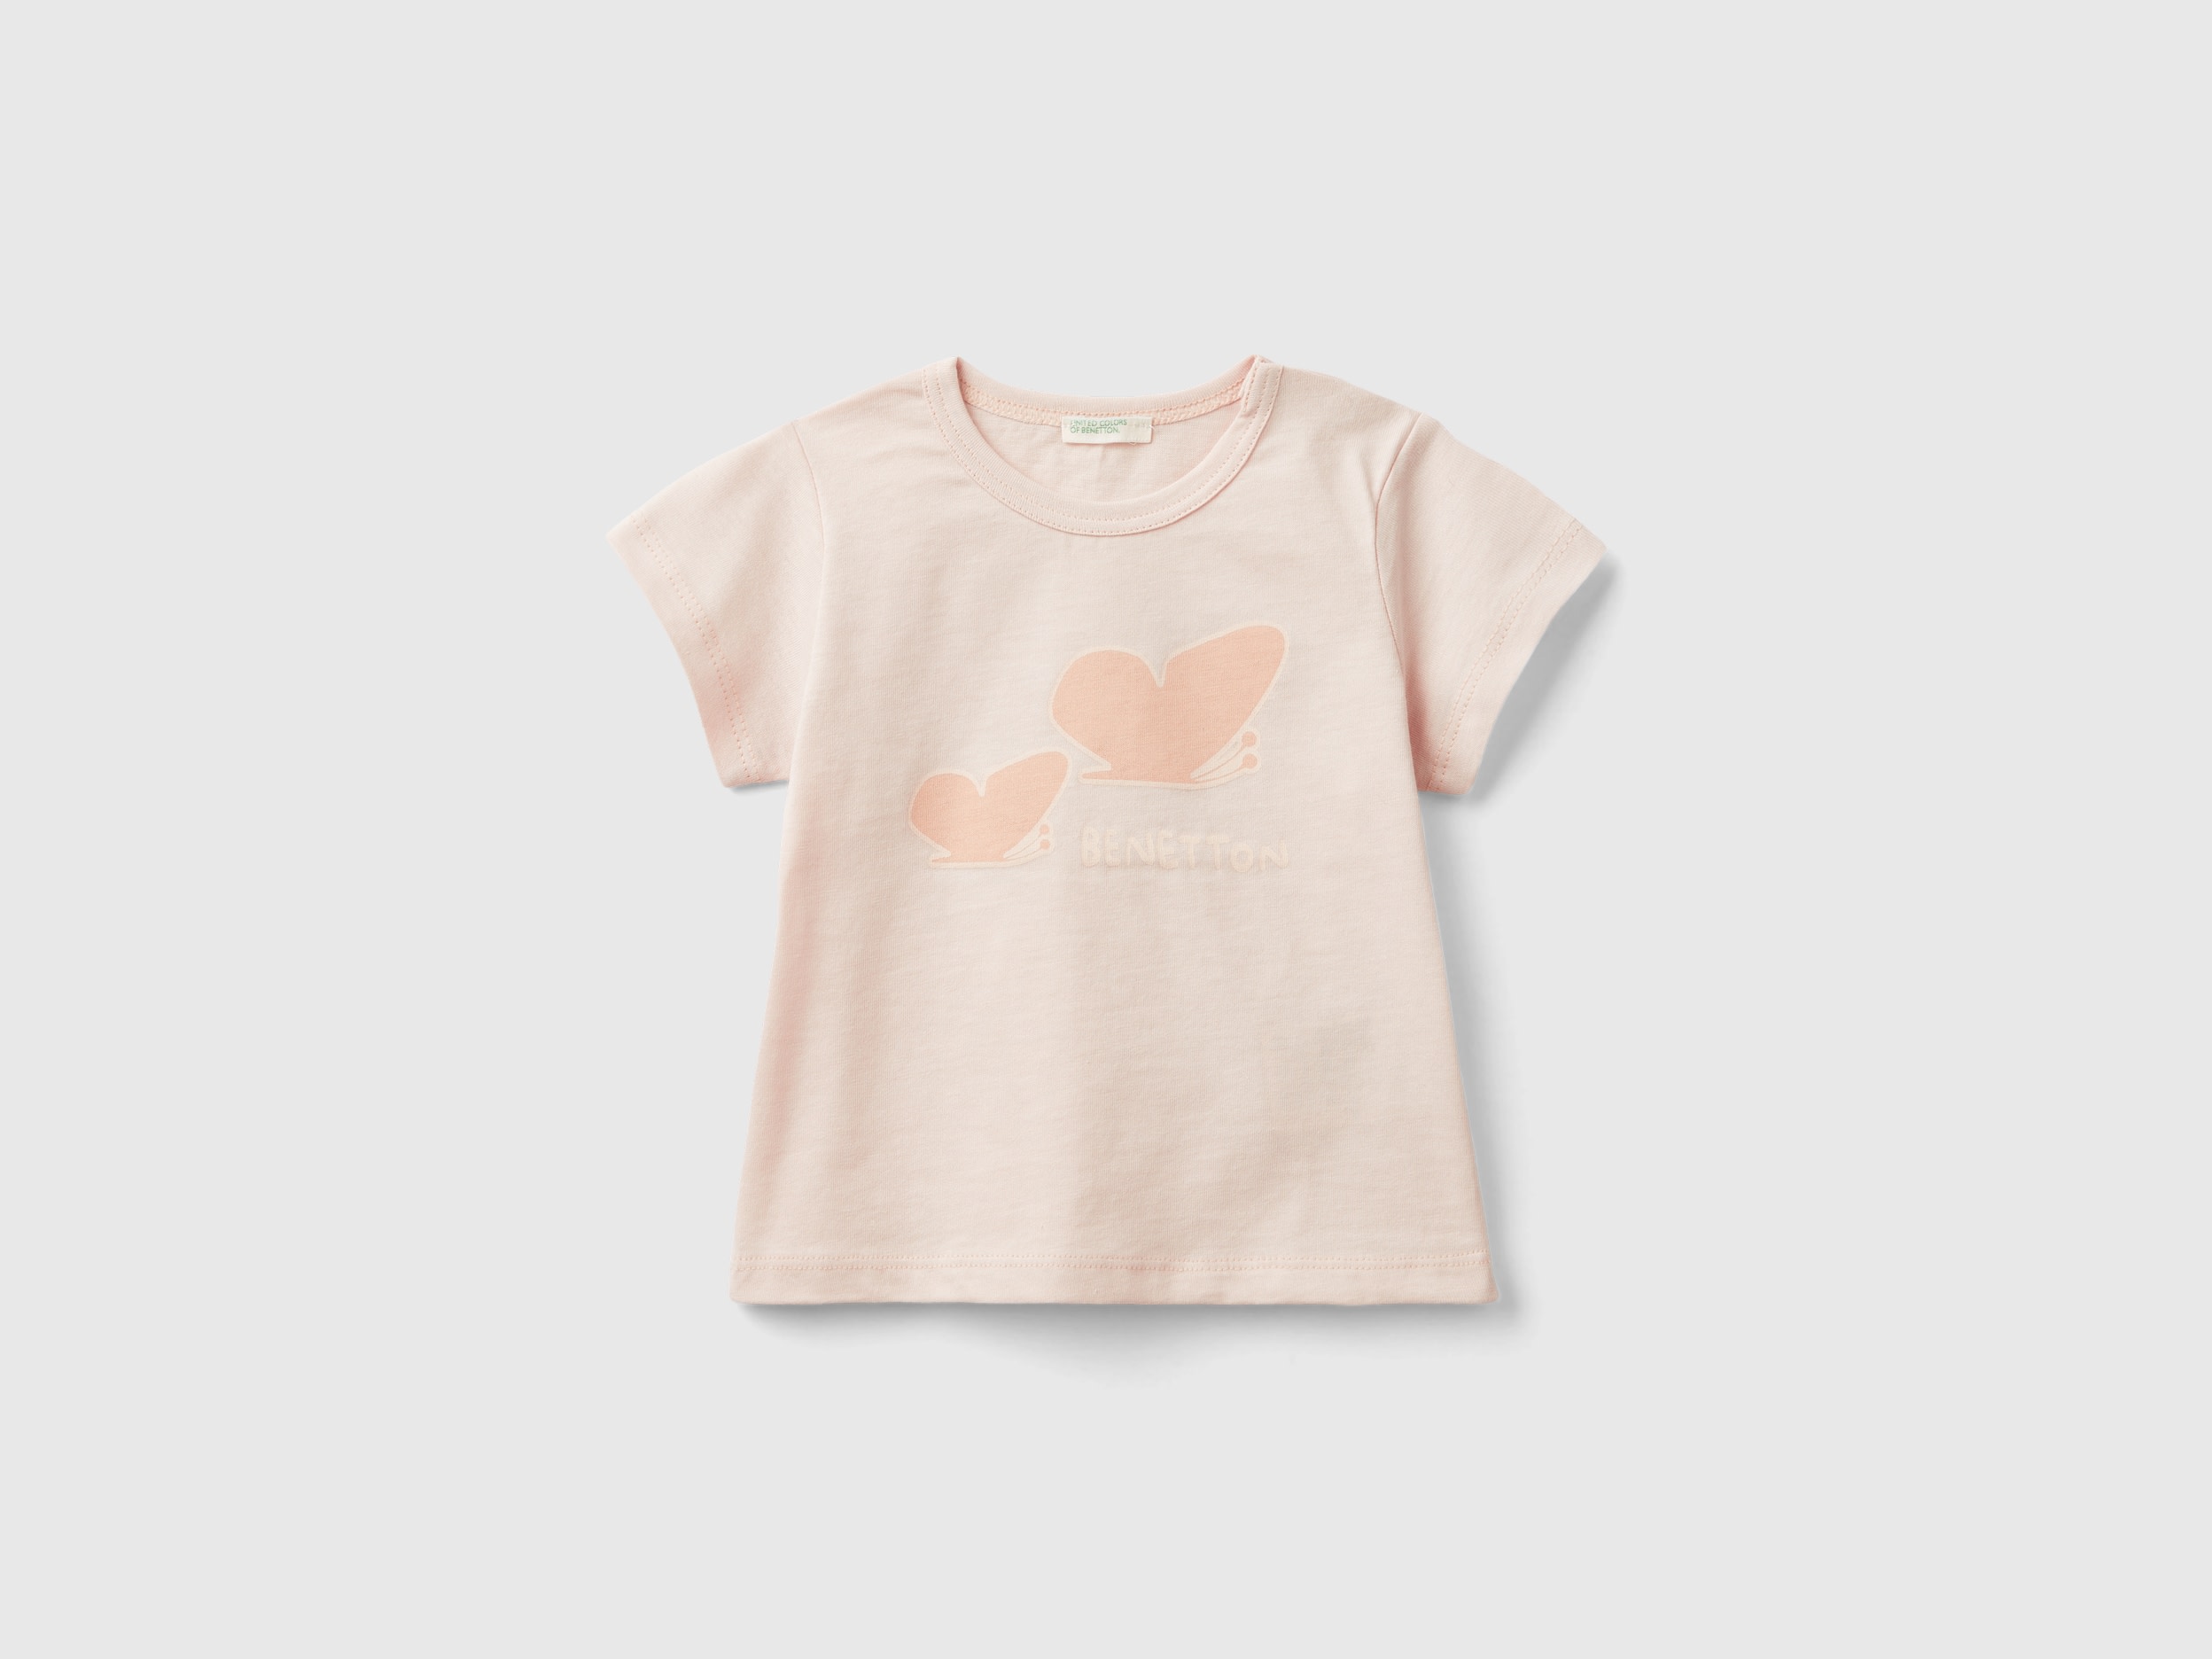 Image of Benetton, Organic Cotton T-shirt With Print, size 50, Peach, Kids